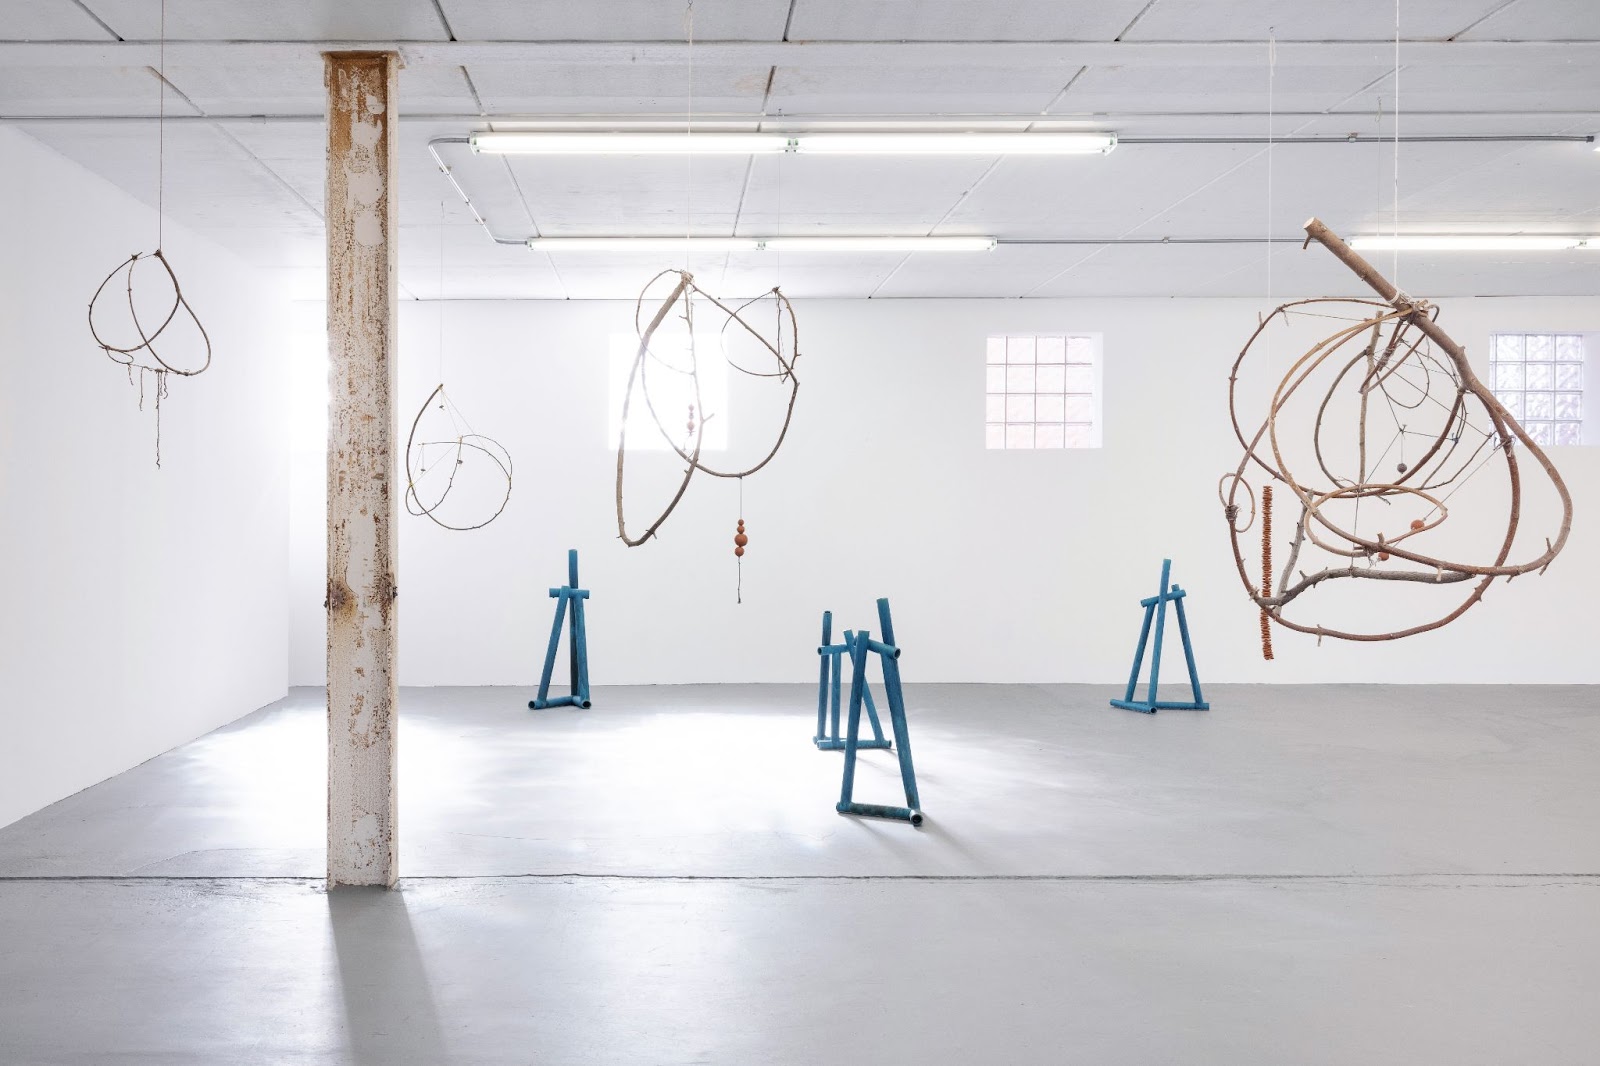 Image: Tetsuya Yamada, Shallow River, 2022. Installation view. In a bright white room, four mobiles made of curving sticks and wire hang. On the ground are four blue pipe structures. Image courtesy the artist and Midway Contemporary Art. Photo by Caylon Hackwith. 